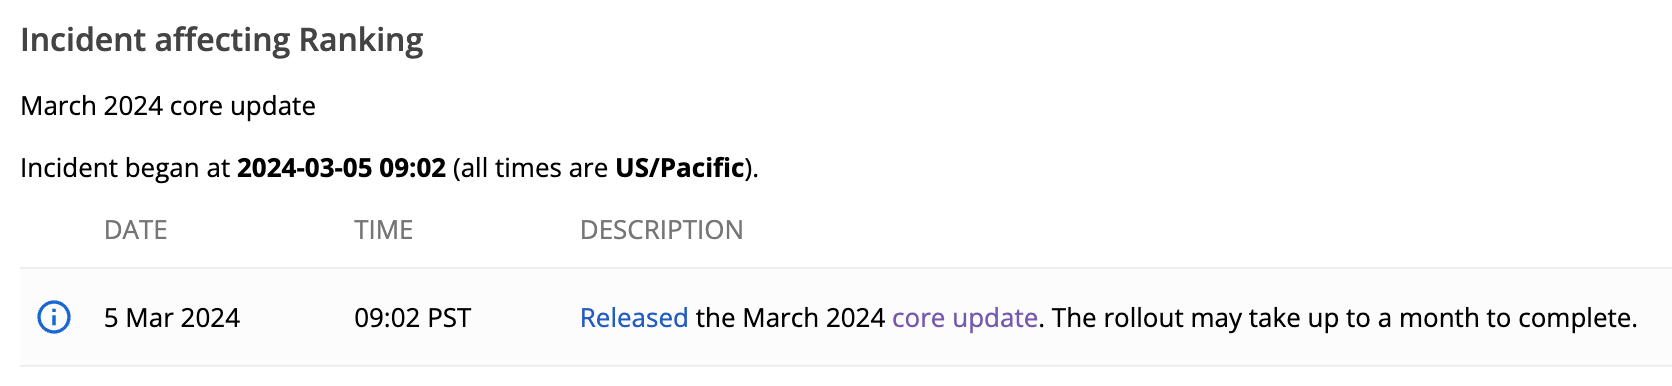 google search dashboard showing launch **** of march 2024 core update